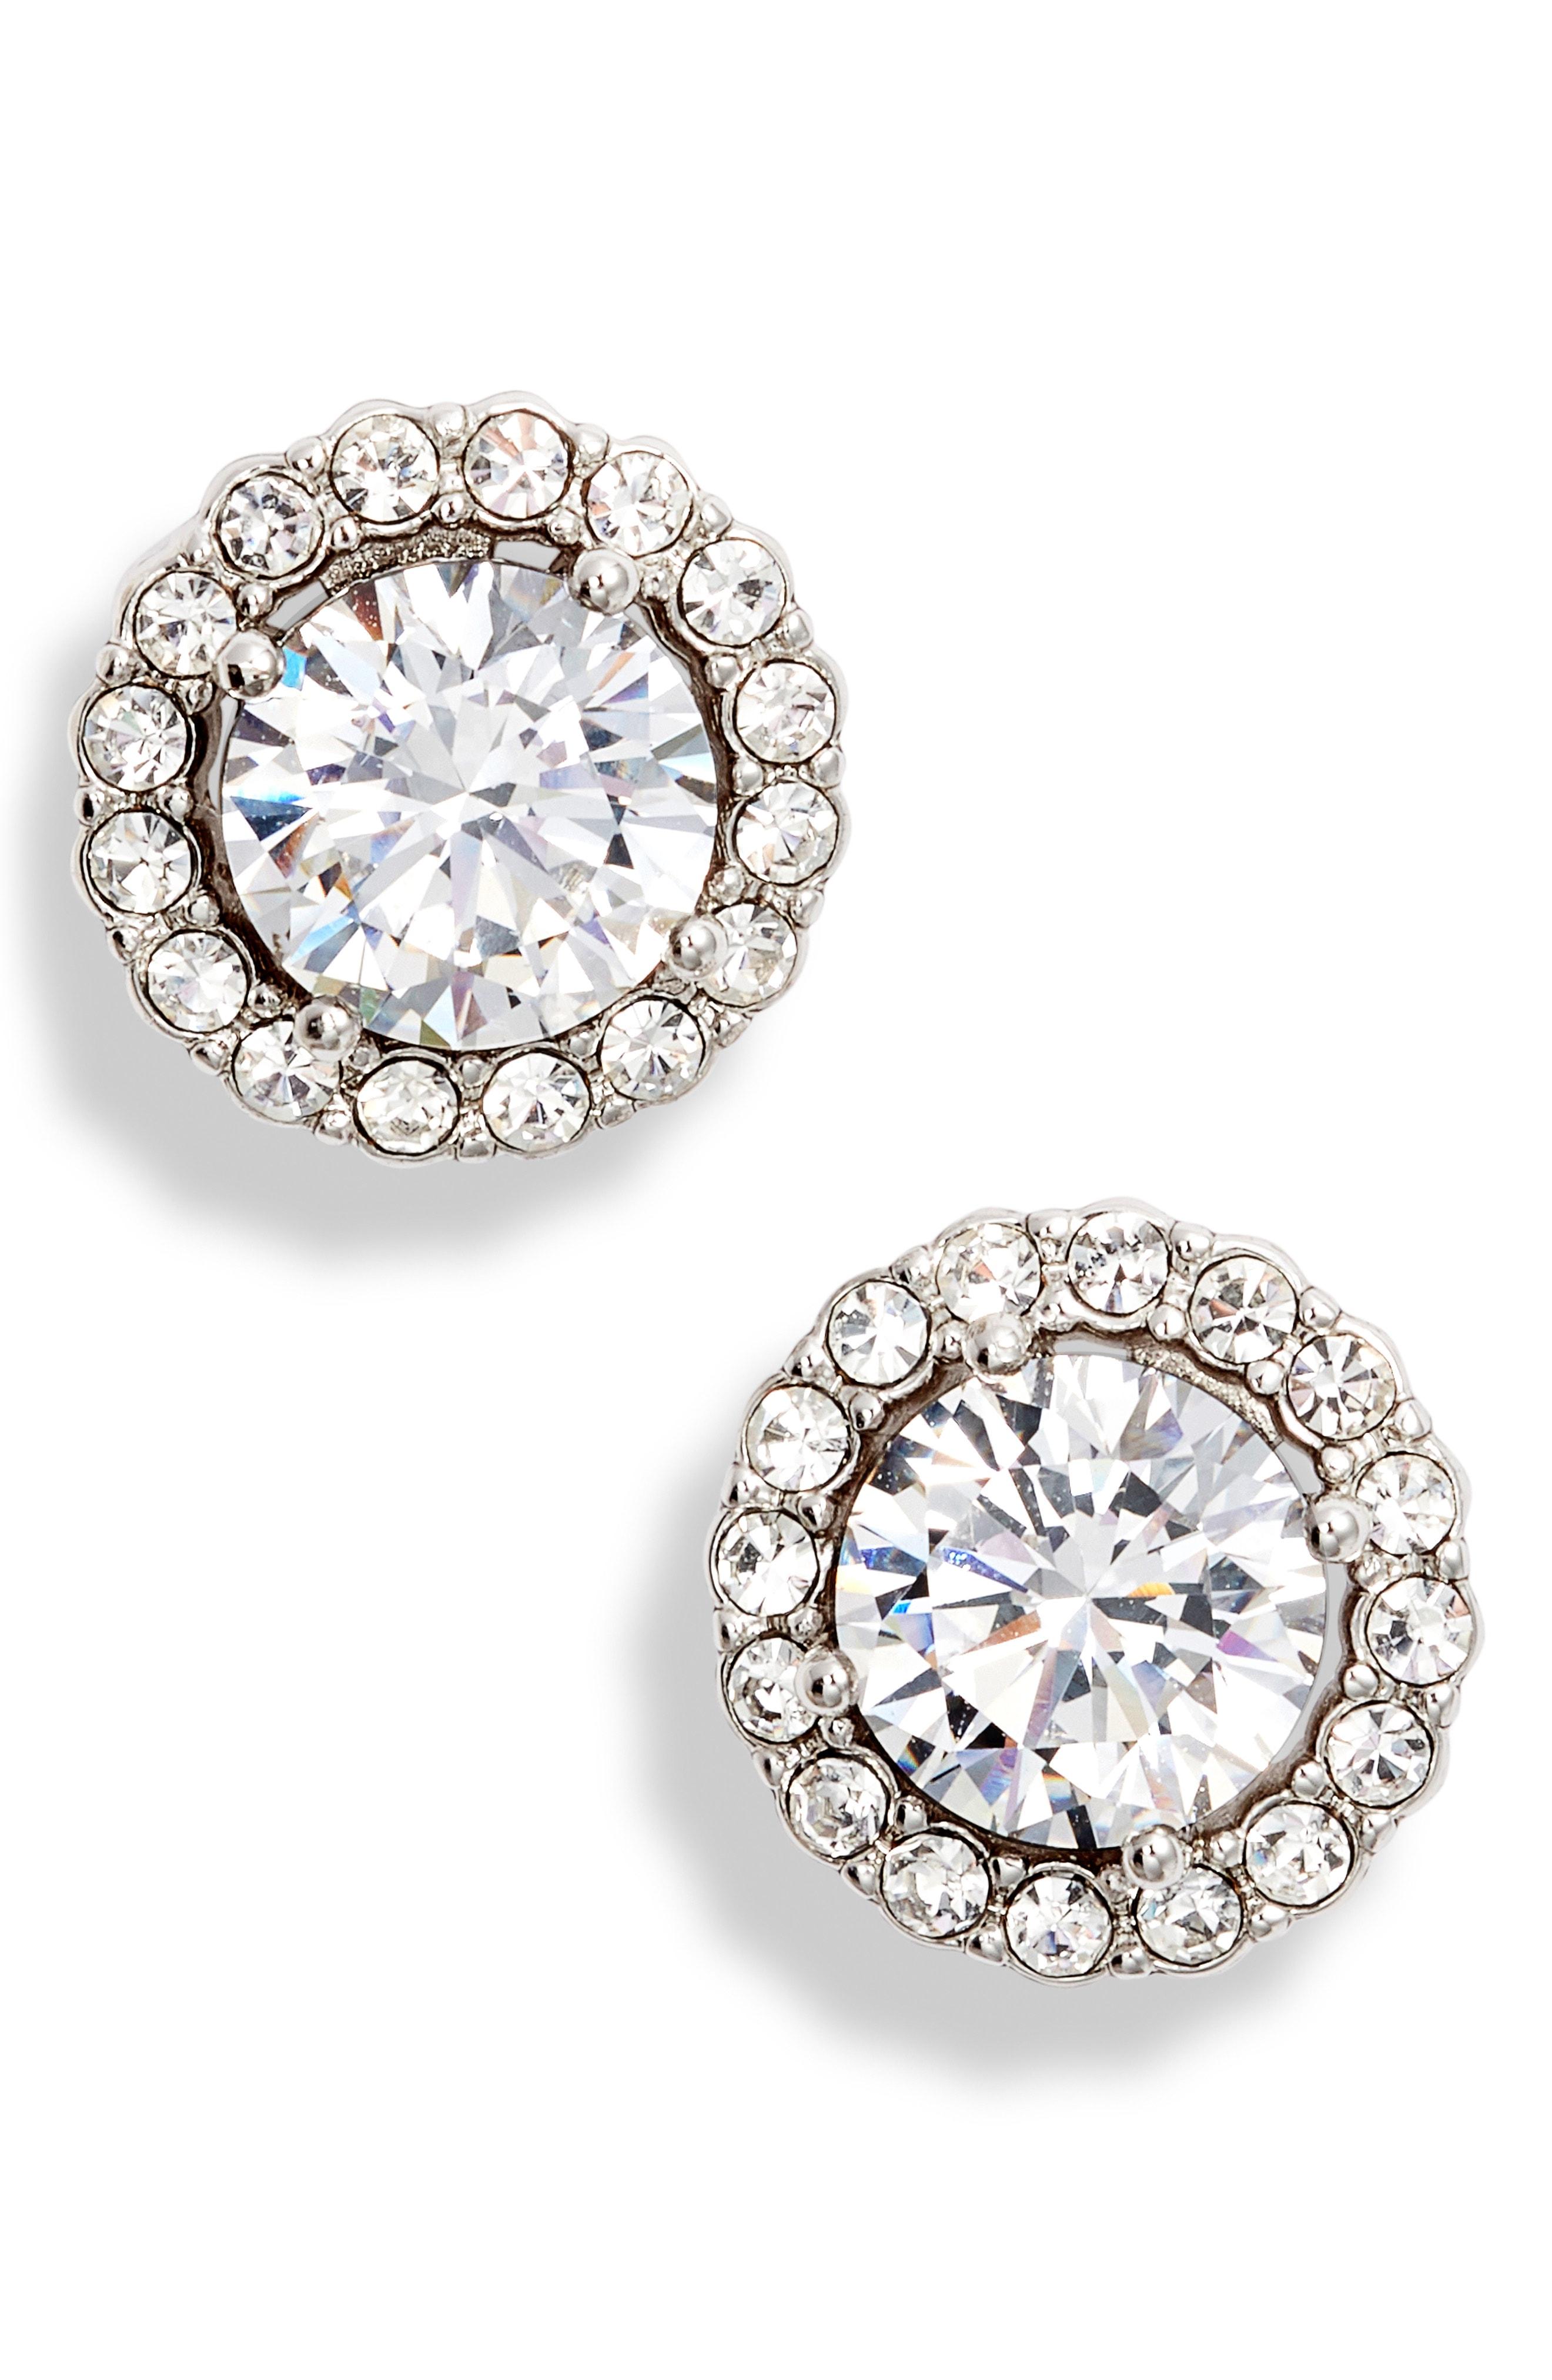 Lyst - Givenchy Halo Button Stud Earrings in Metallic